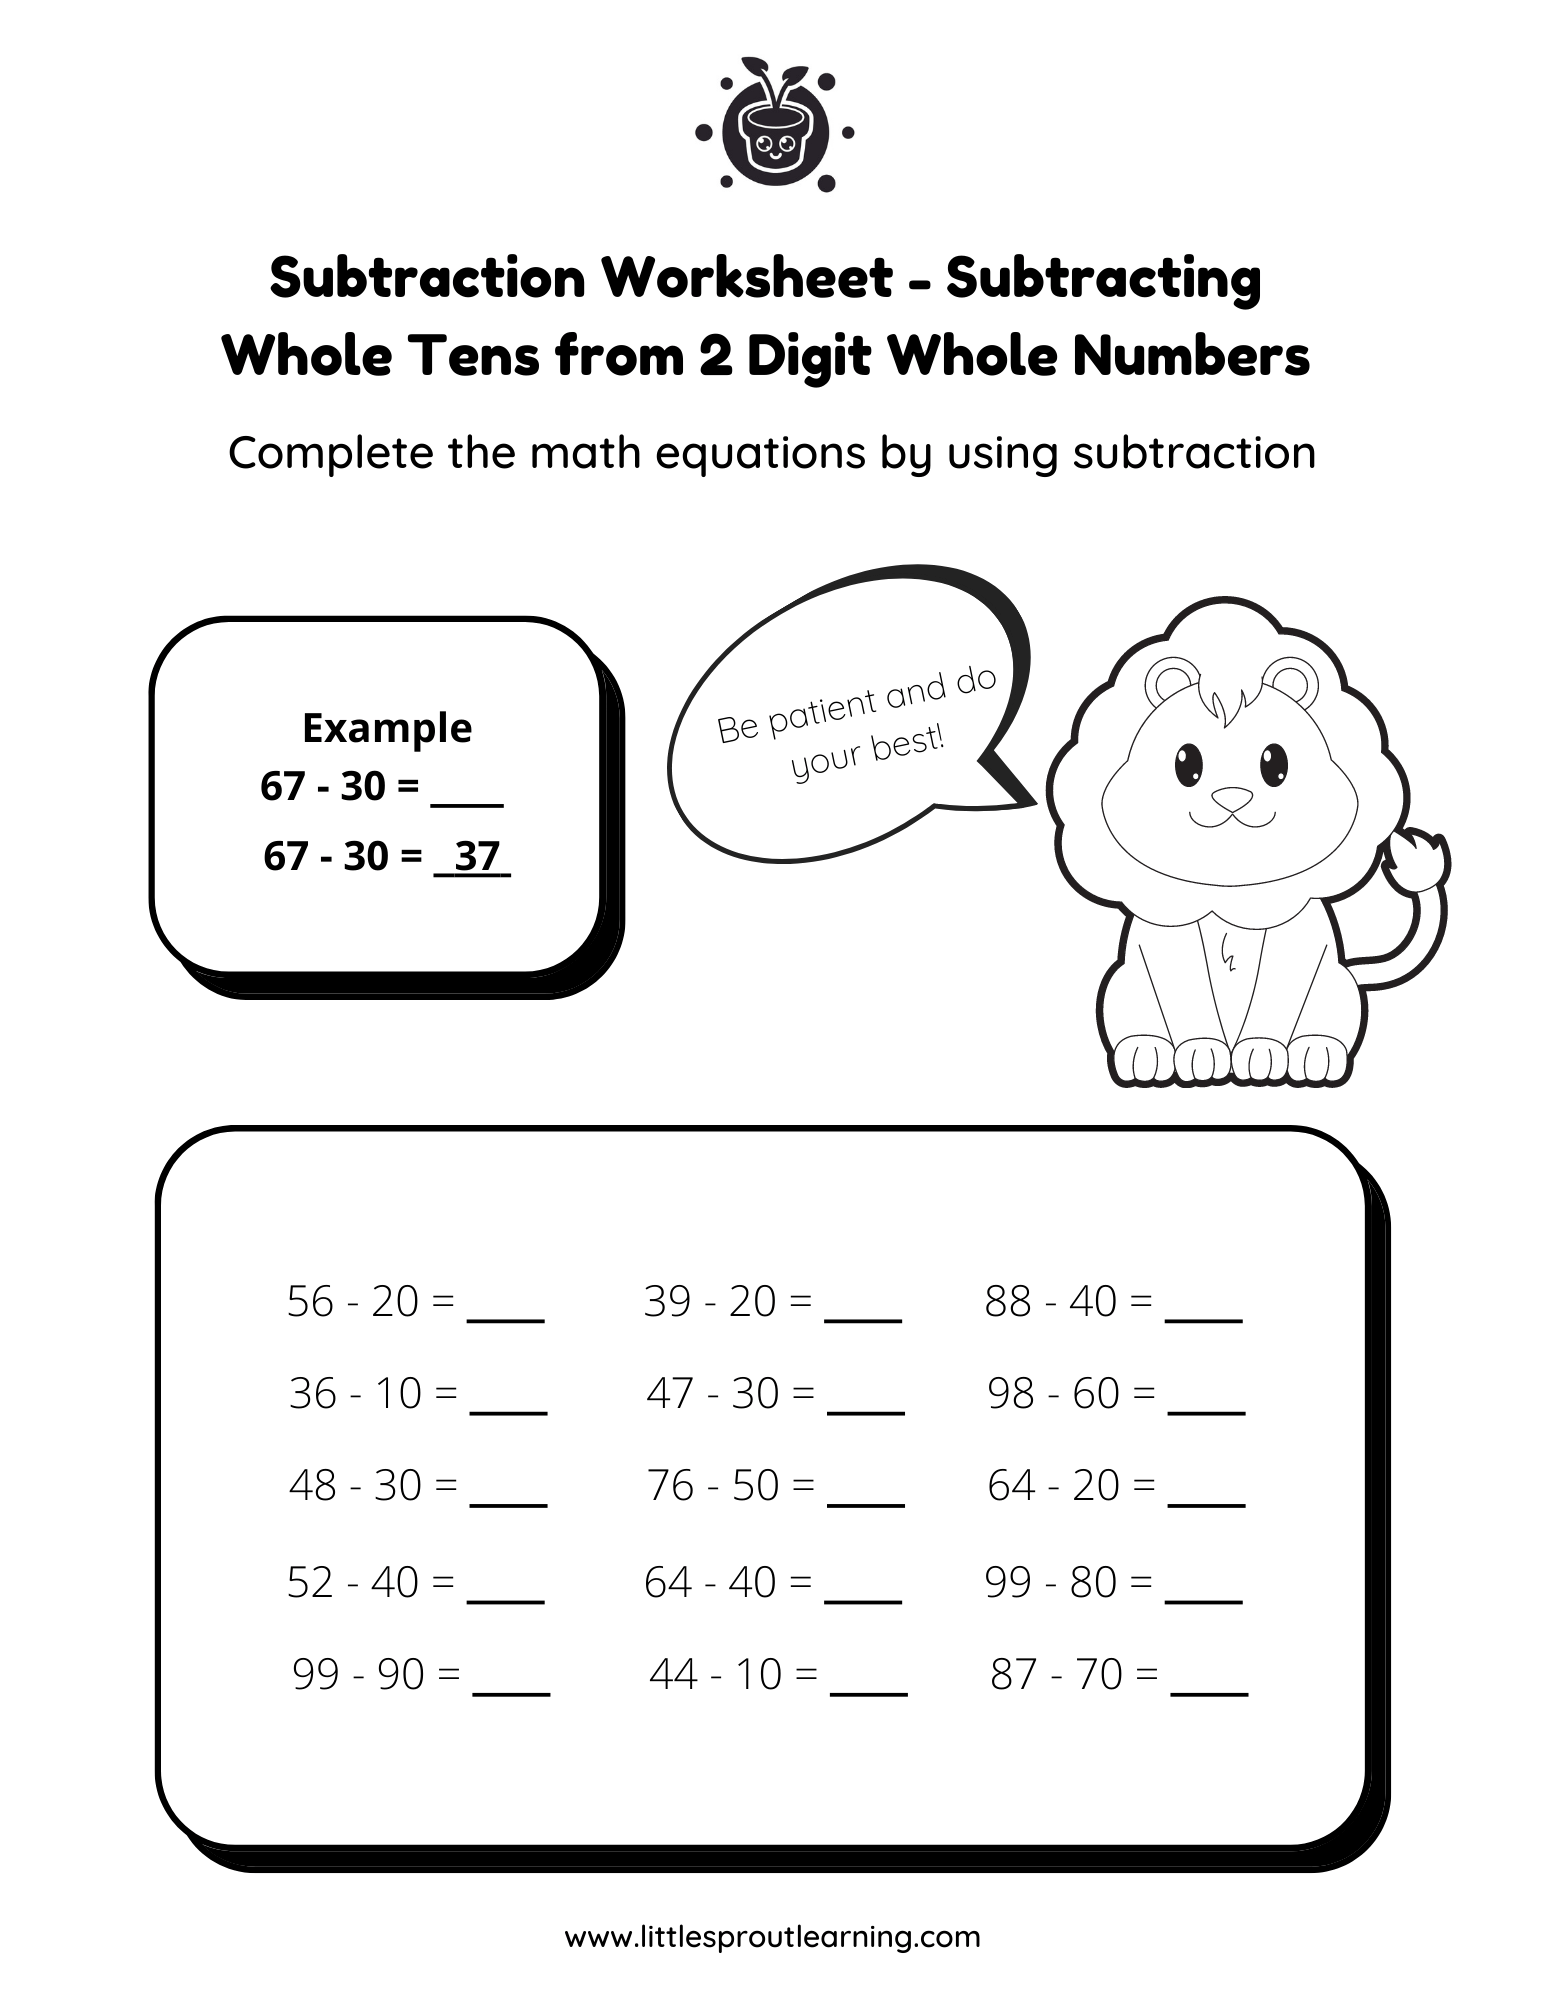 Subtracting Whole Tens from 2 Digit Whole Numbers